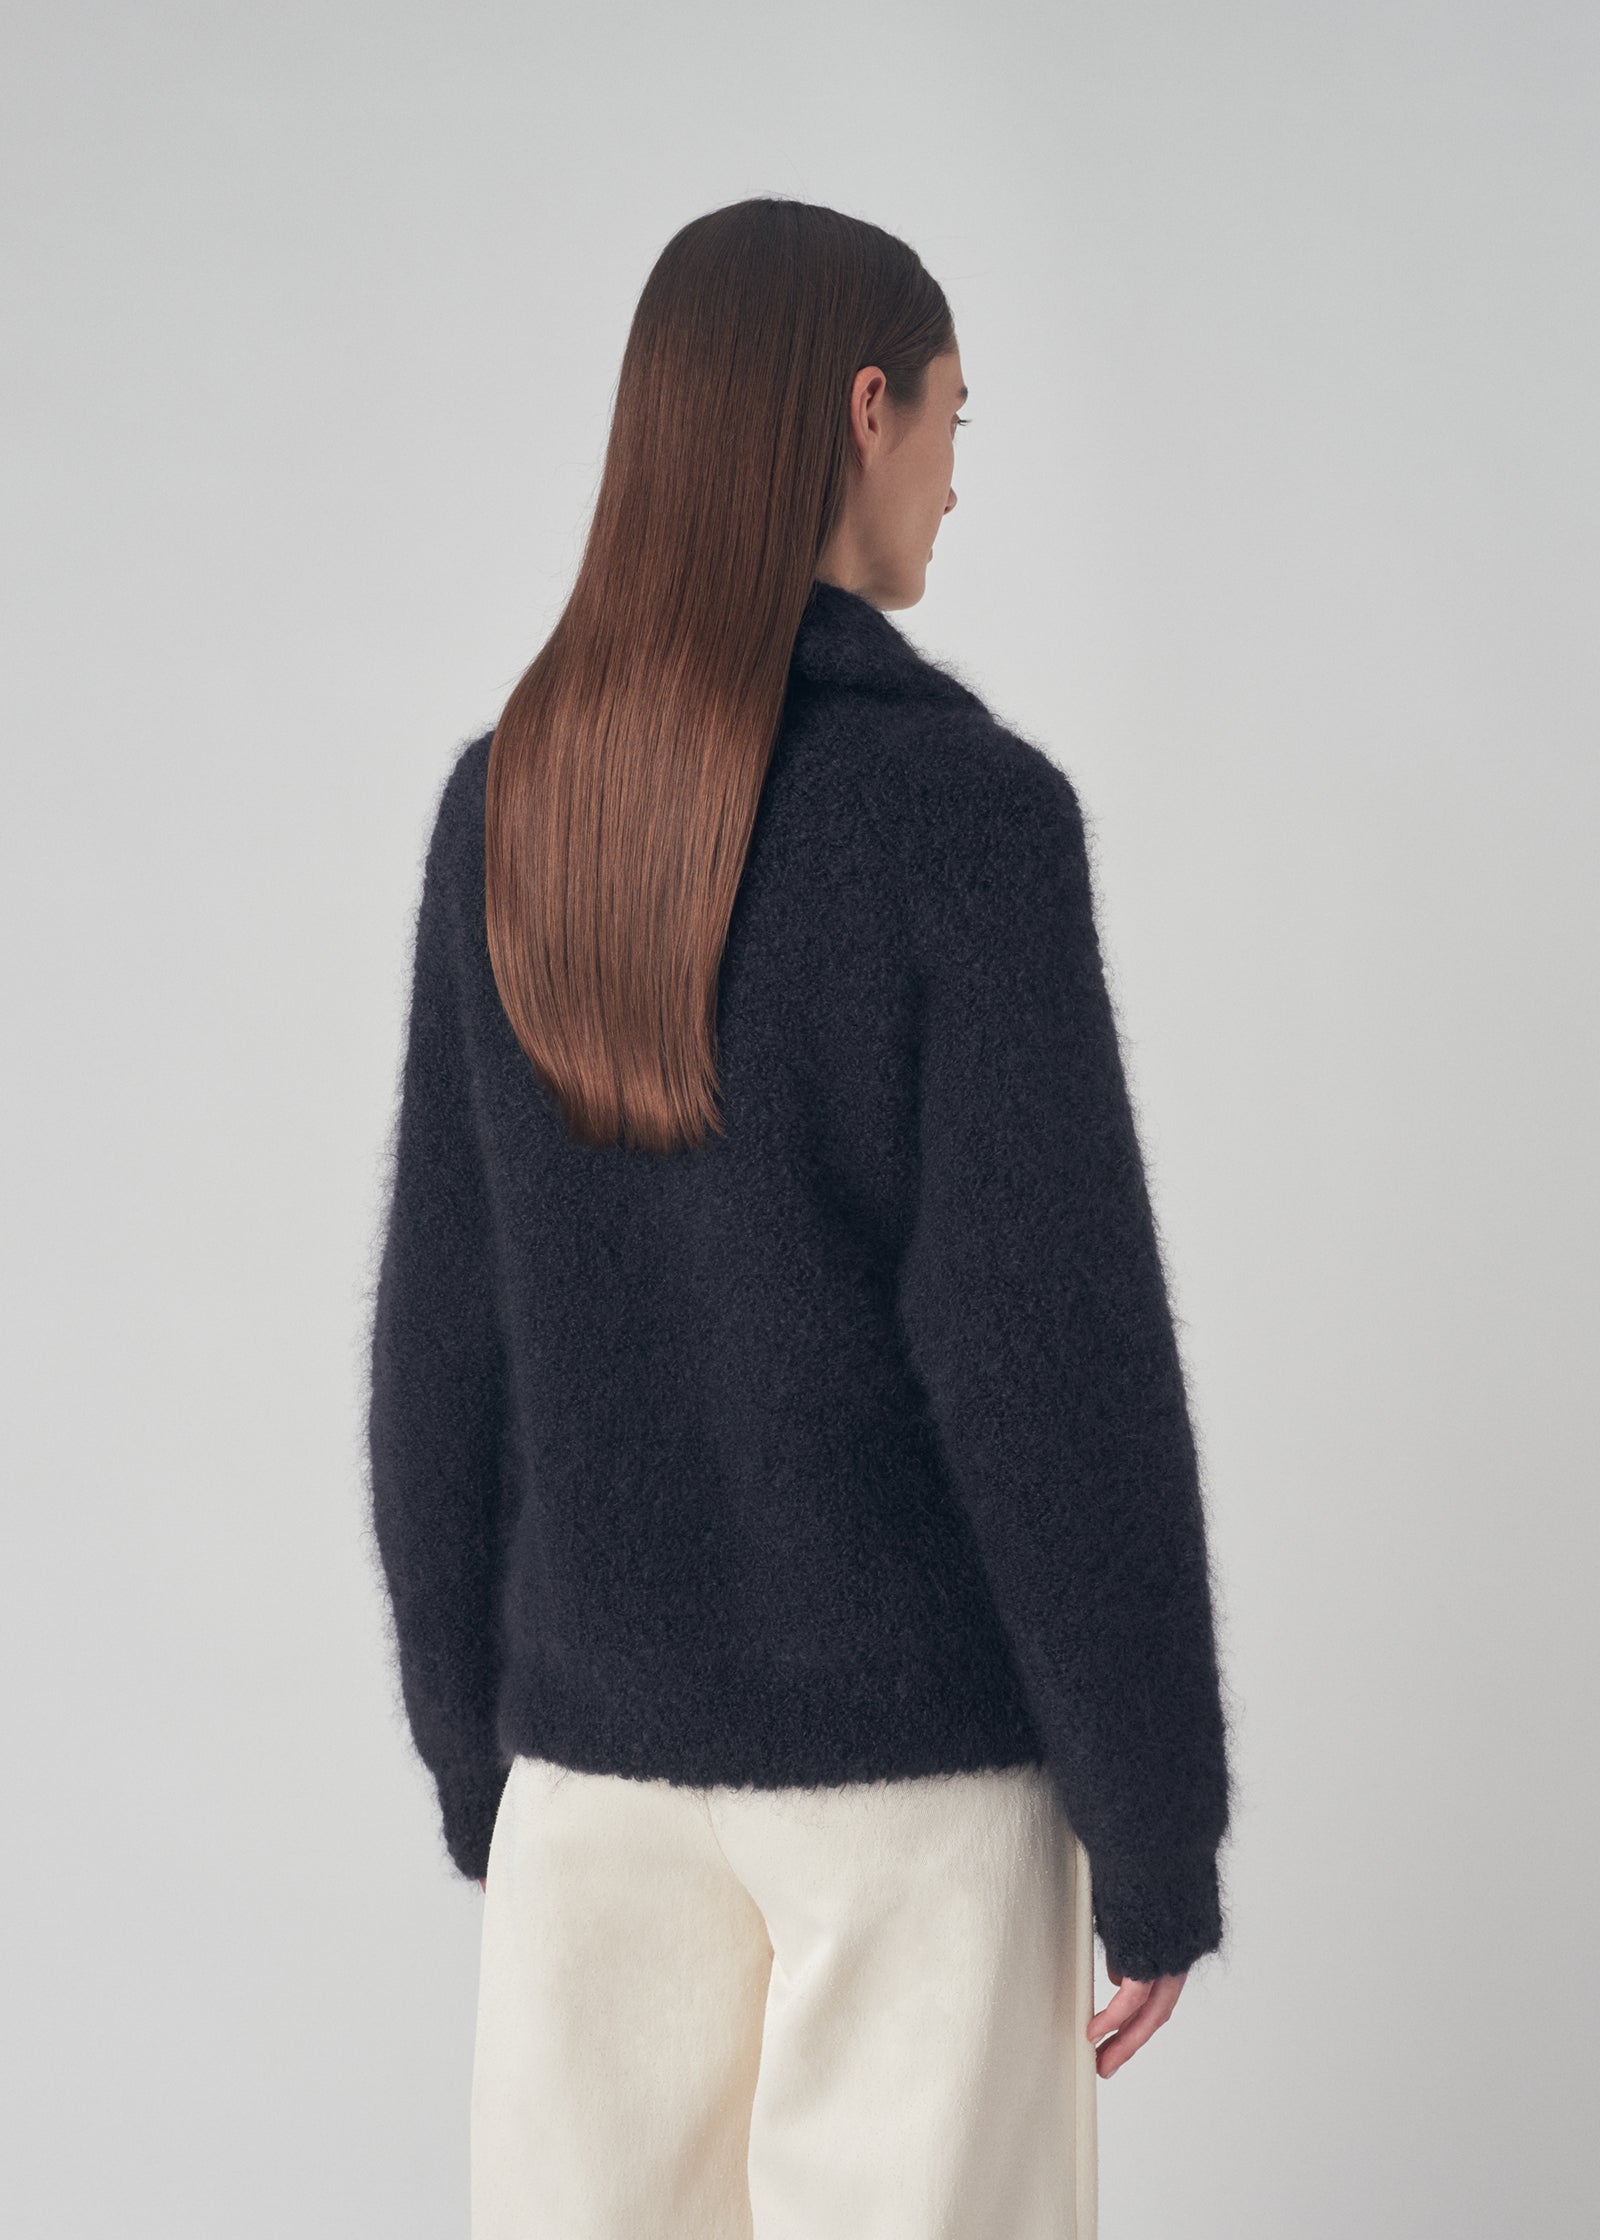 Bouclé Cardigan in Mohair Wool- Black - CO Collections